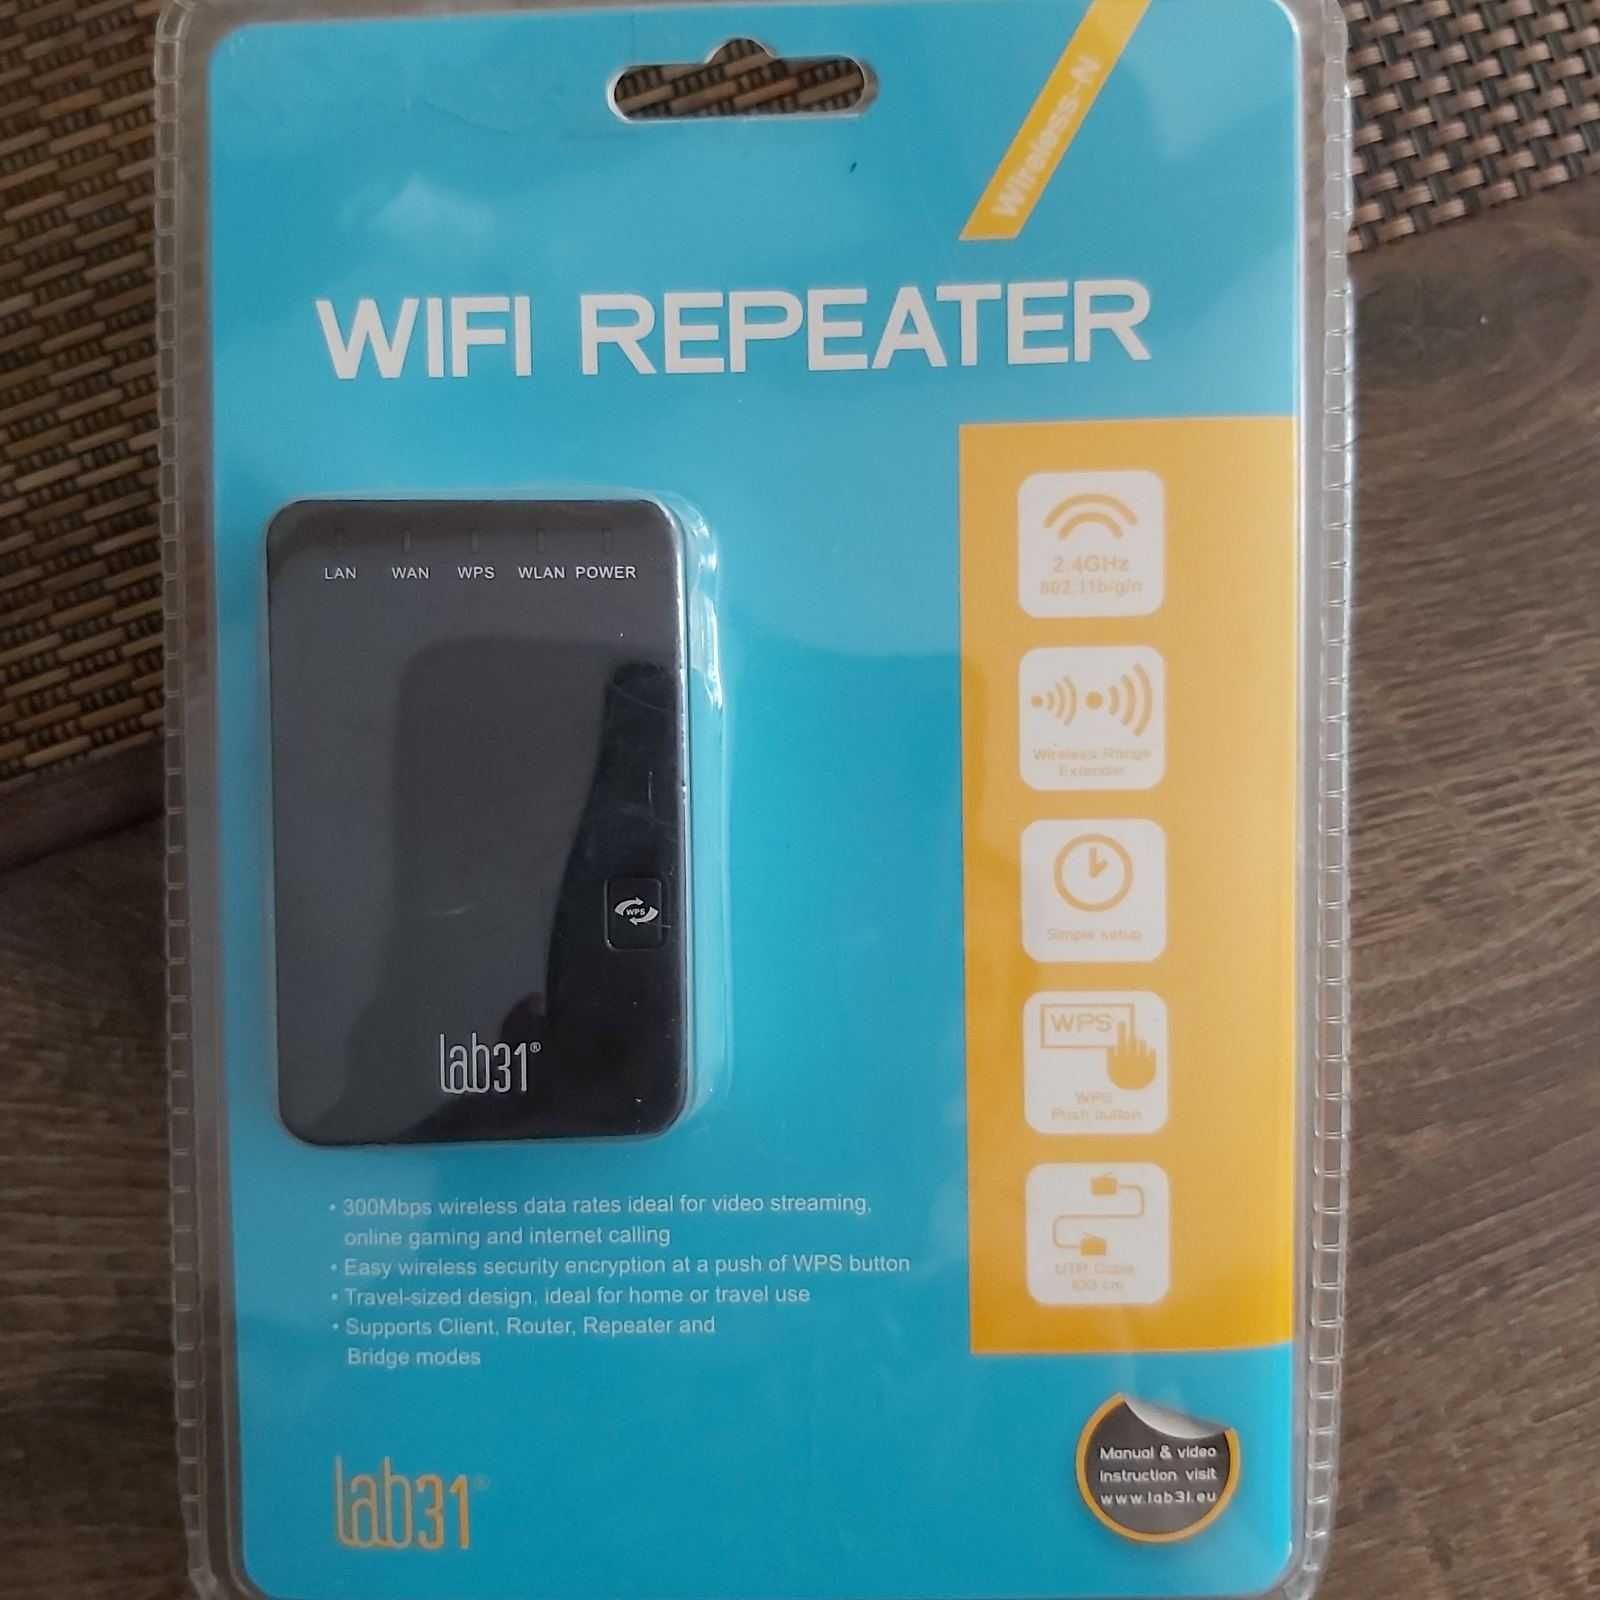 Wifi Repeater lab31